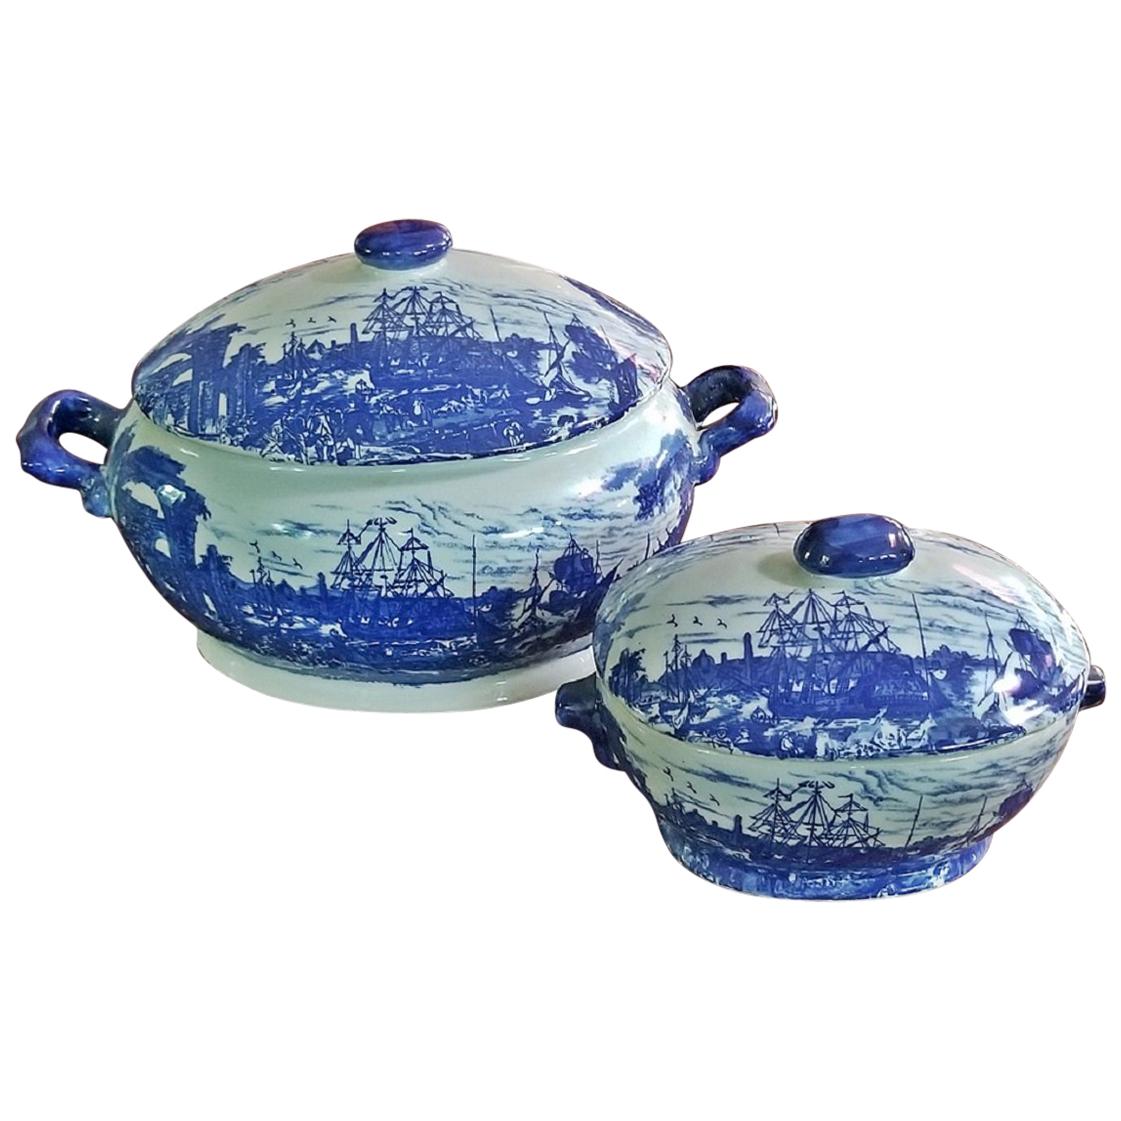 Victoria Ware Ironstone Lidded Tureens of Shipping Scenes